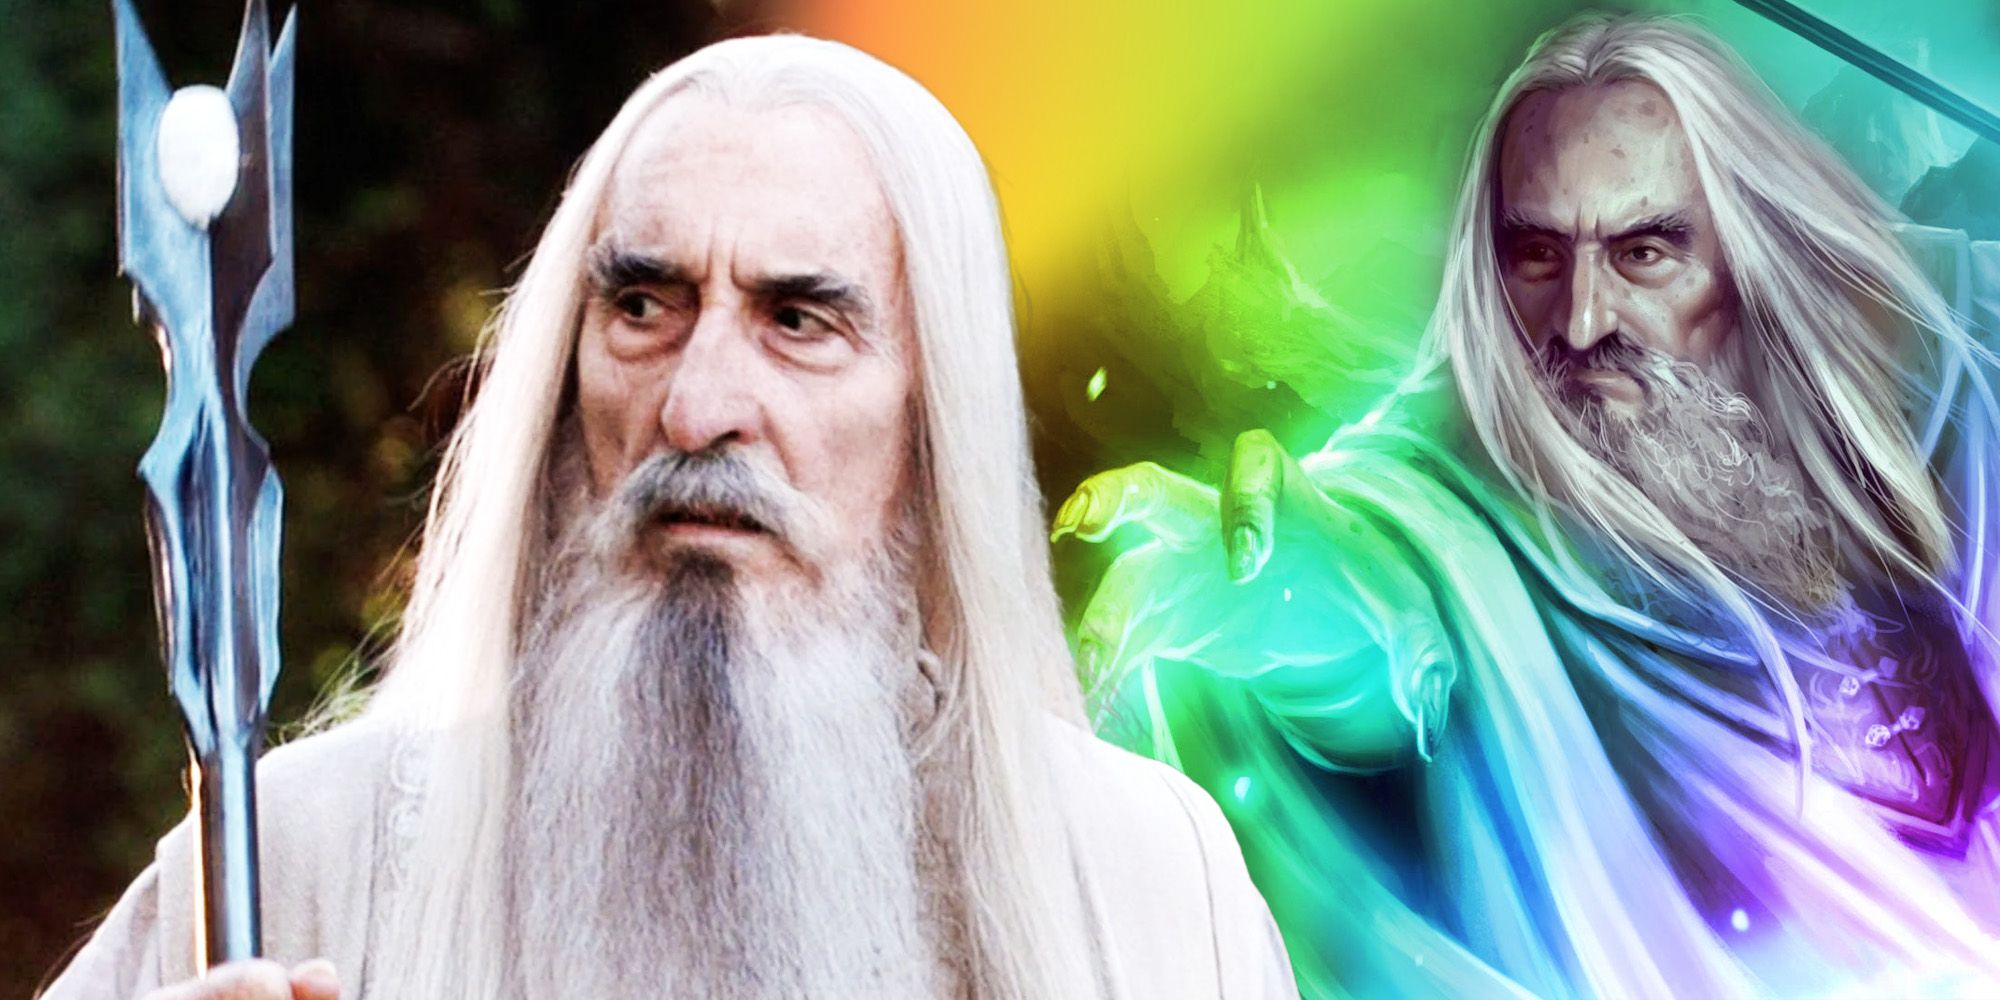 lord-of-the-rings-movies-saruman-color-transformation-cut